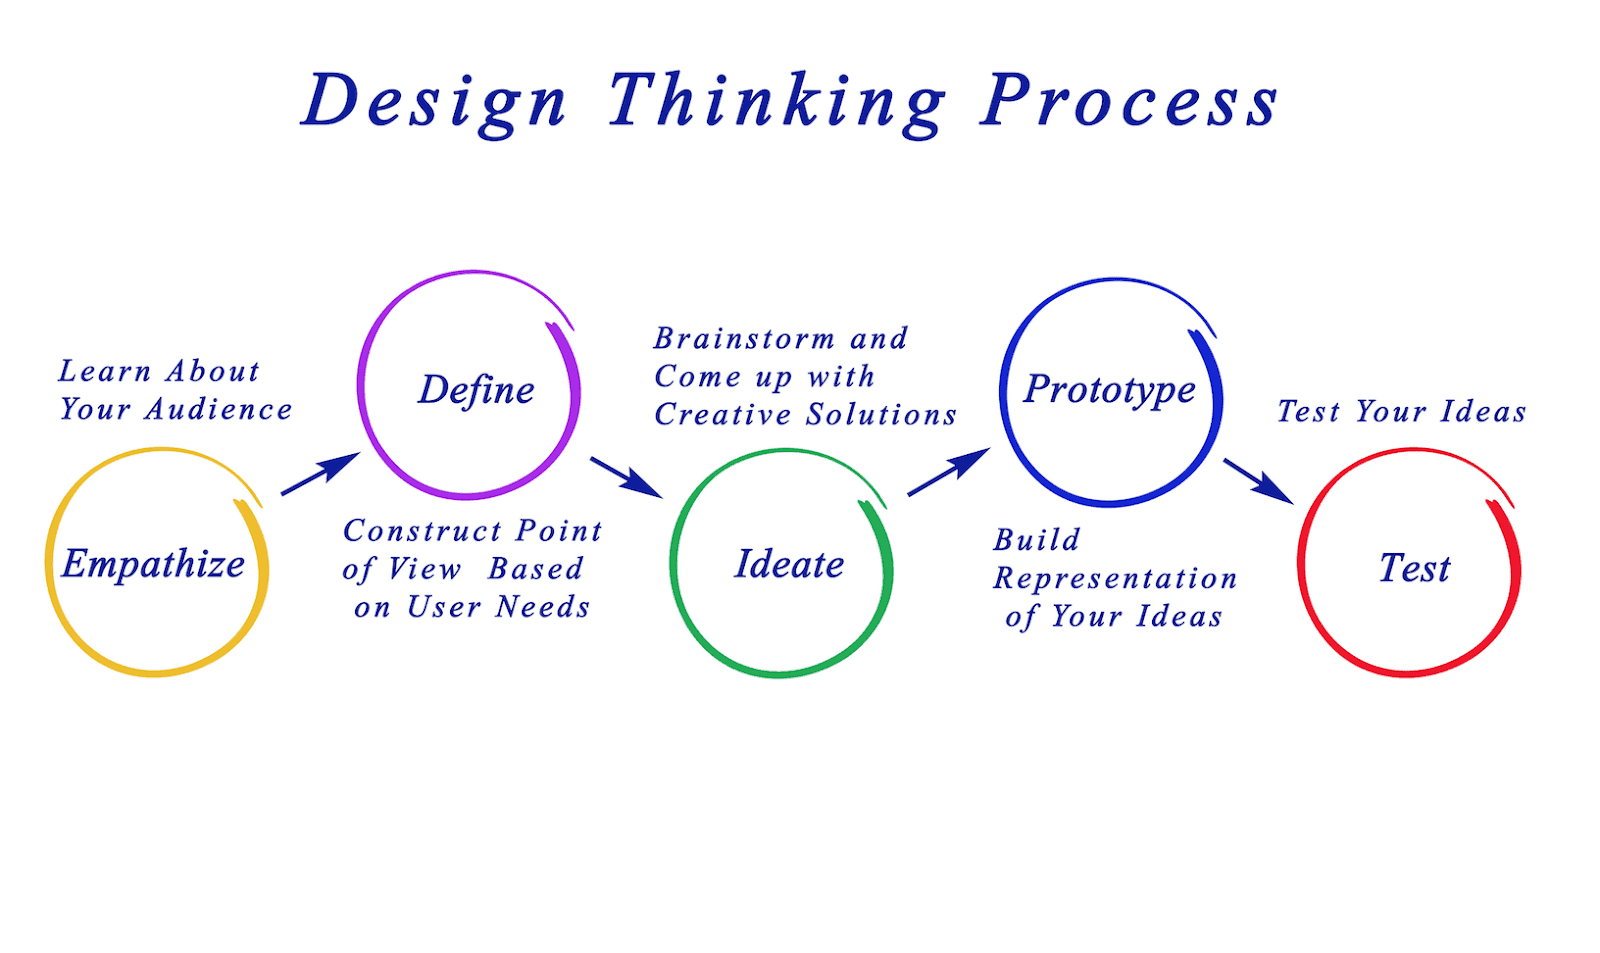 How do you test design thinking?